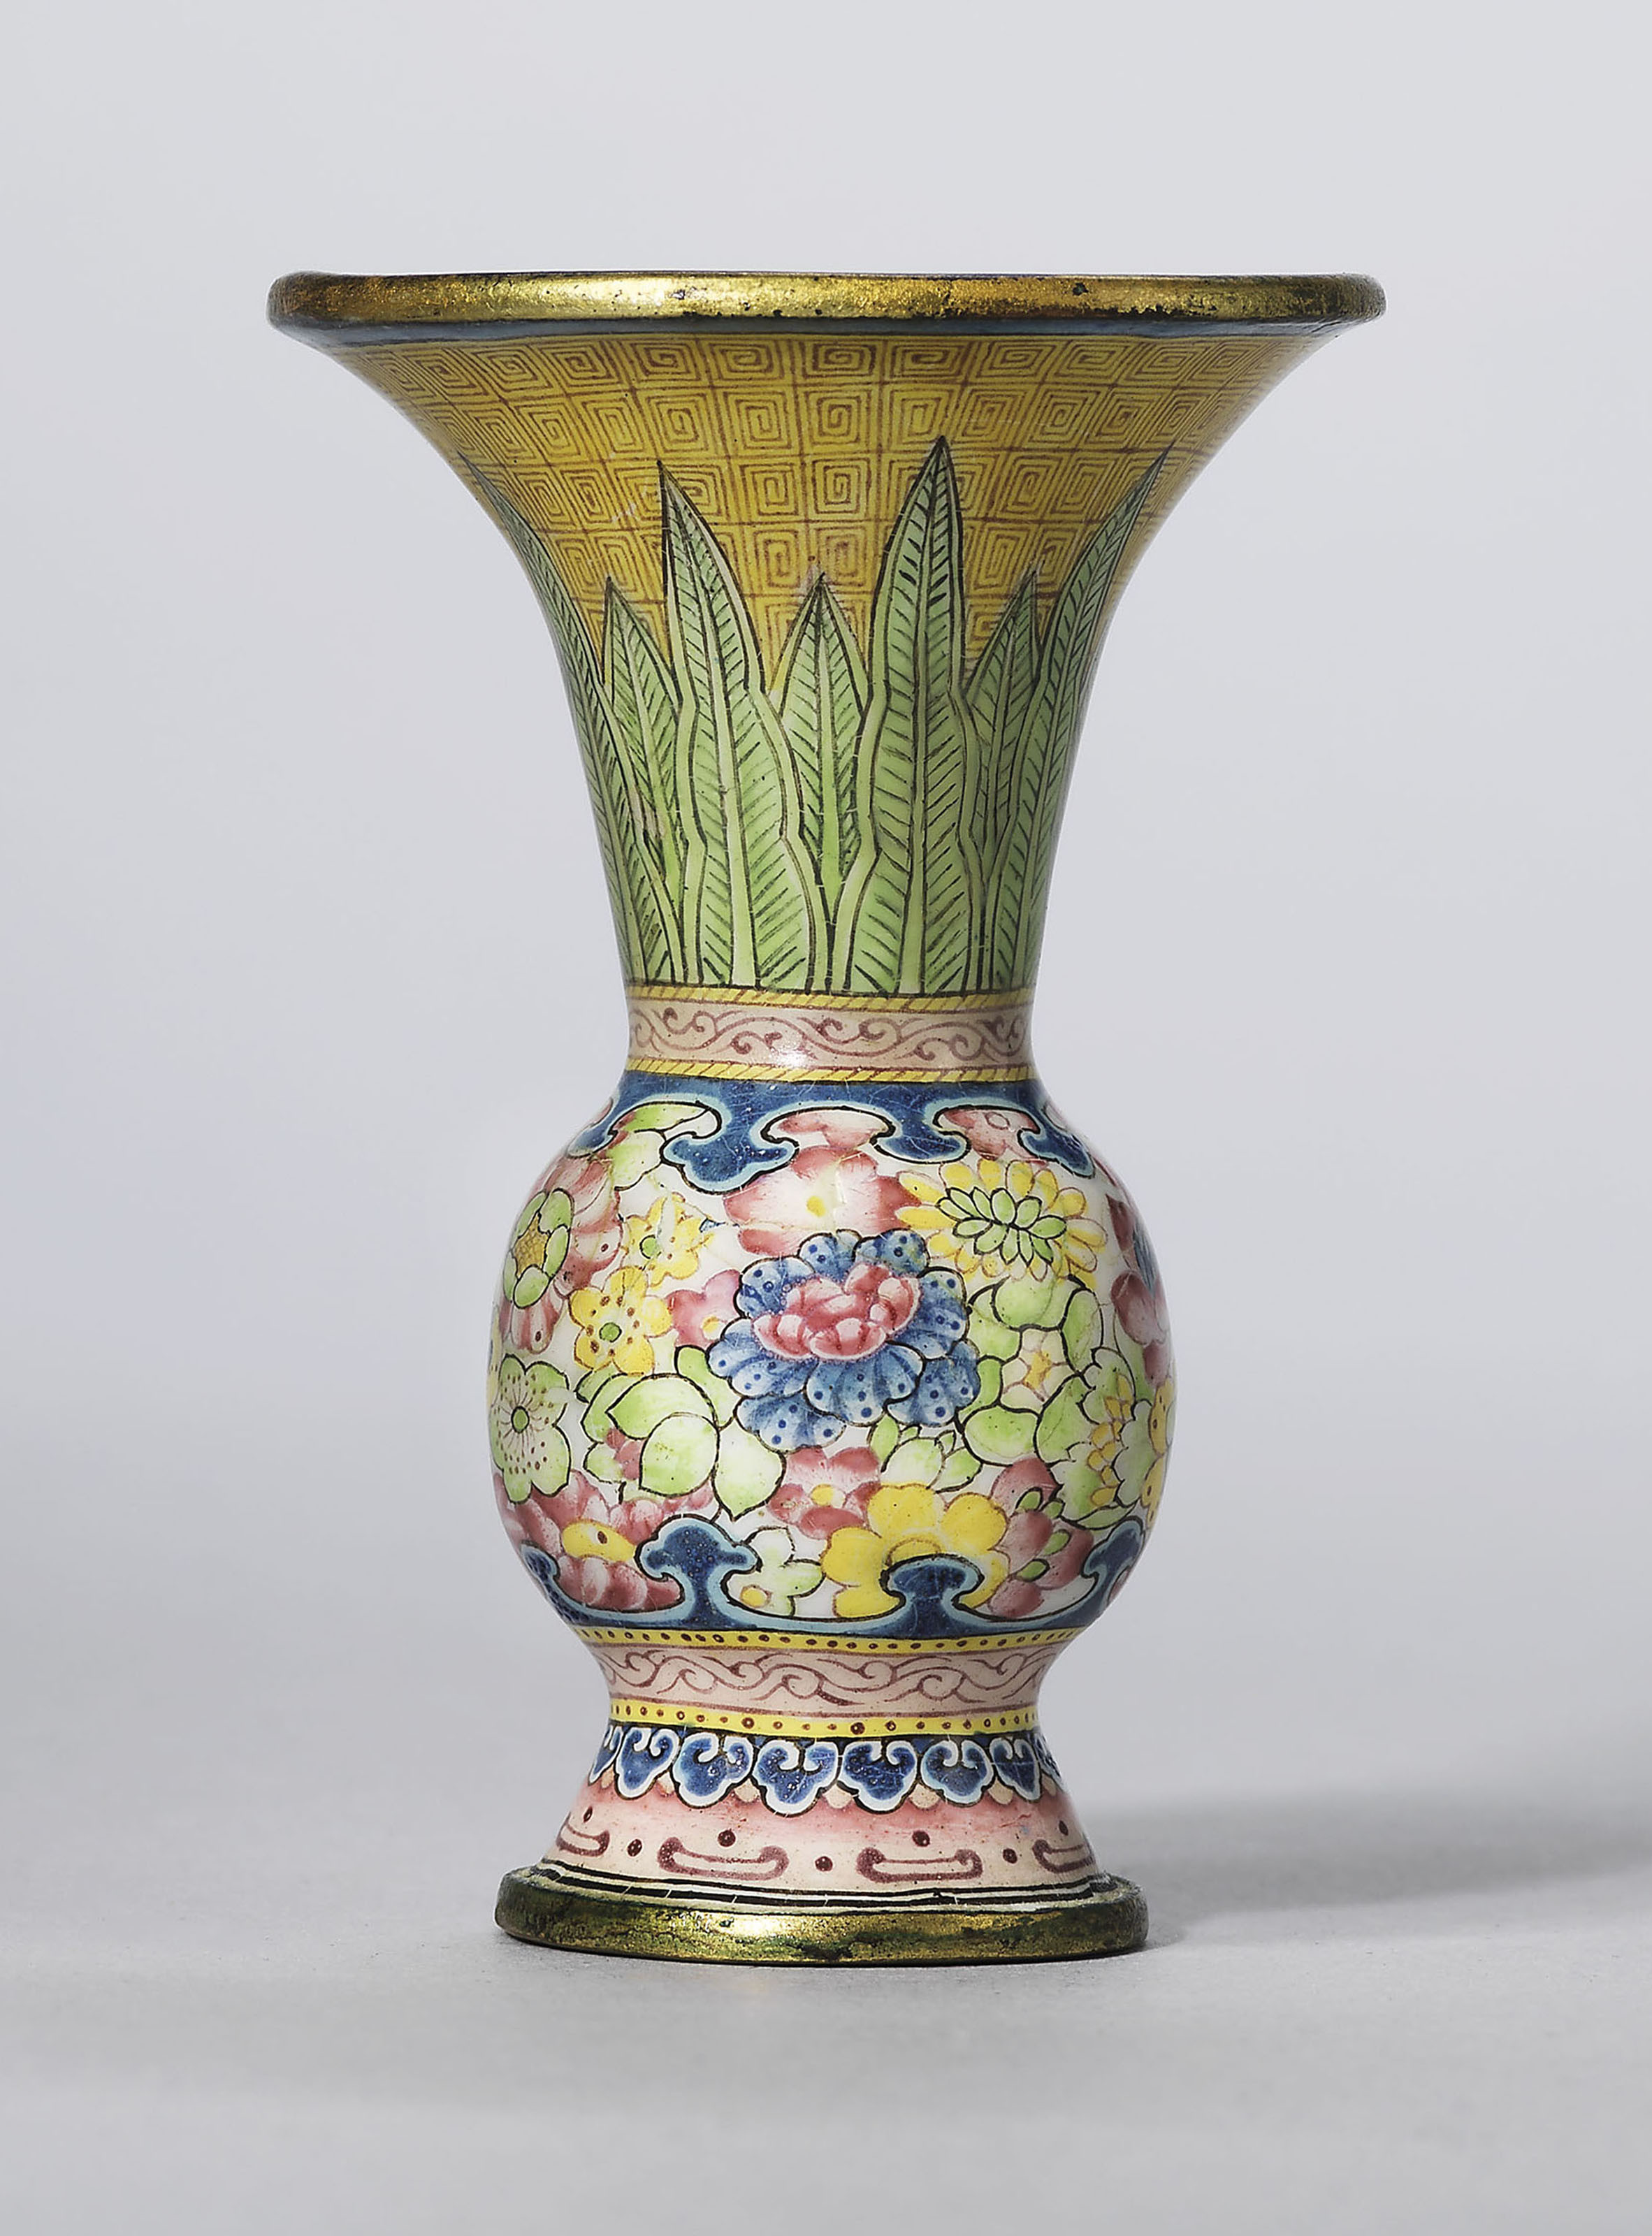 15 Wonderful Old Time Pottery Glass Vases 2024 free download old time pottery glass vases of a guide to the symbolism of flowers on chinese ceramics christies within a rare painted enamel gu shaped miniature vase qianlong four character mark in